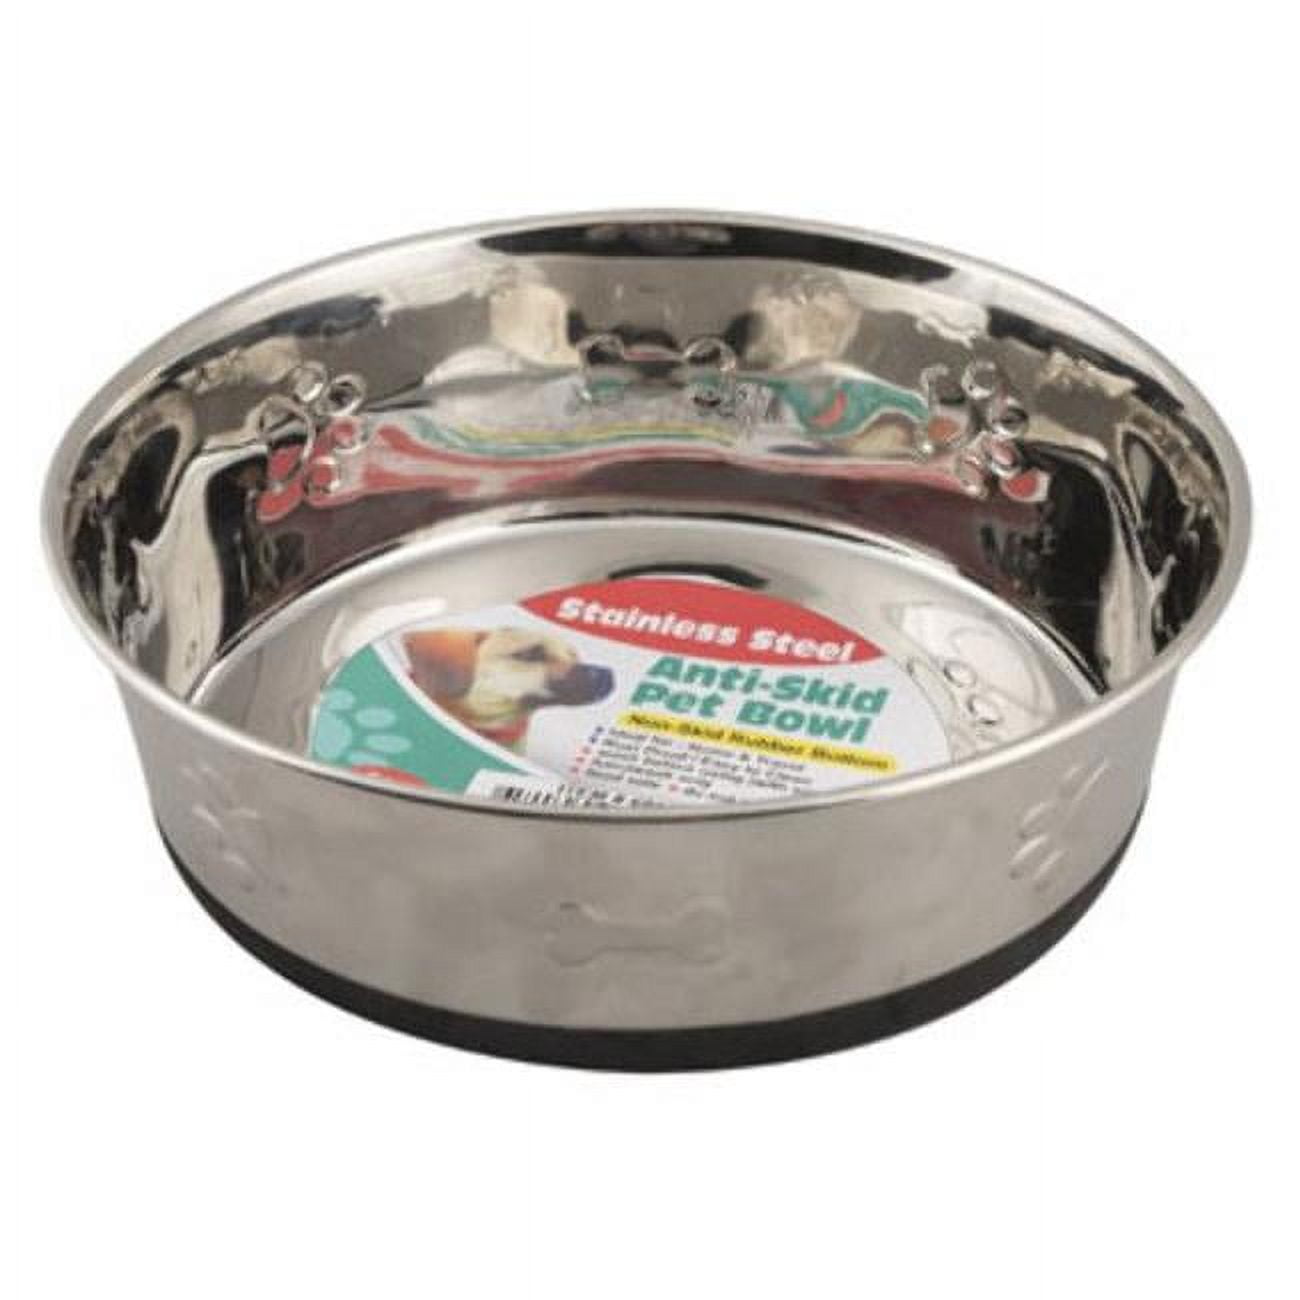 Picture of DDI 2324883 56 oz Stainless Steel Pet Bowl with Embossed Paw Prints, Silver - Case of 24 - 24 Per Pack